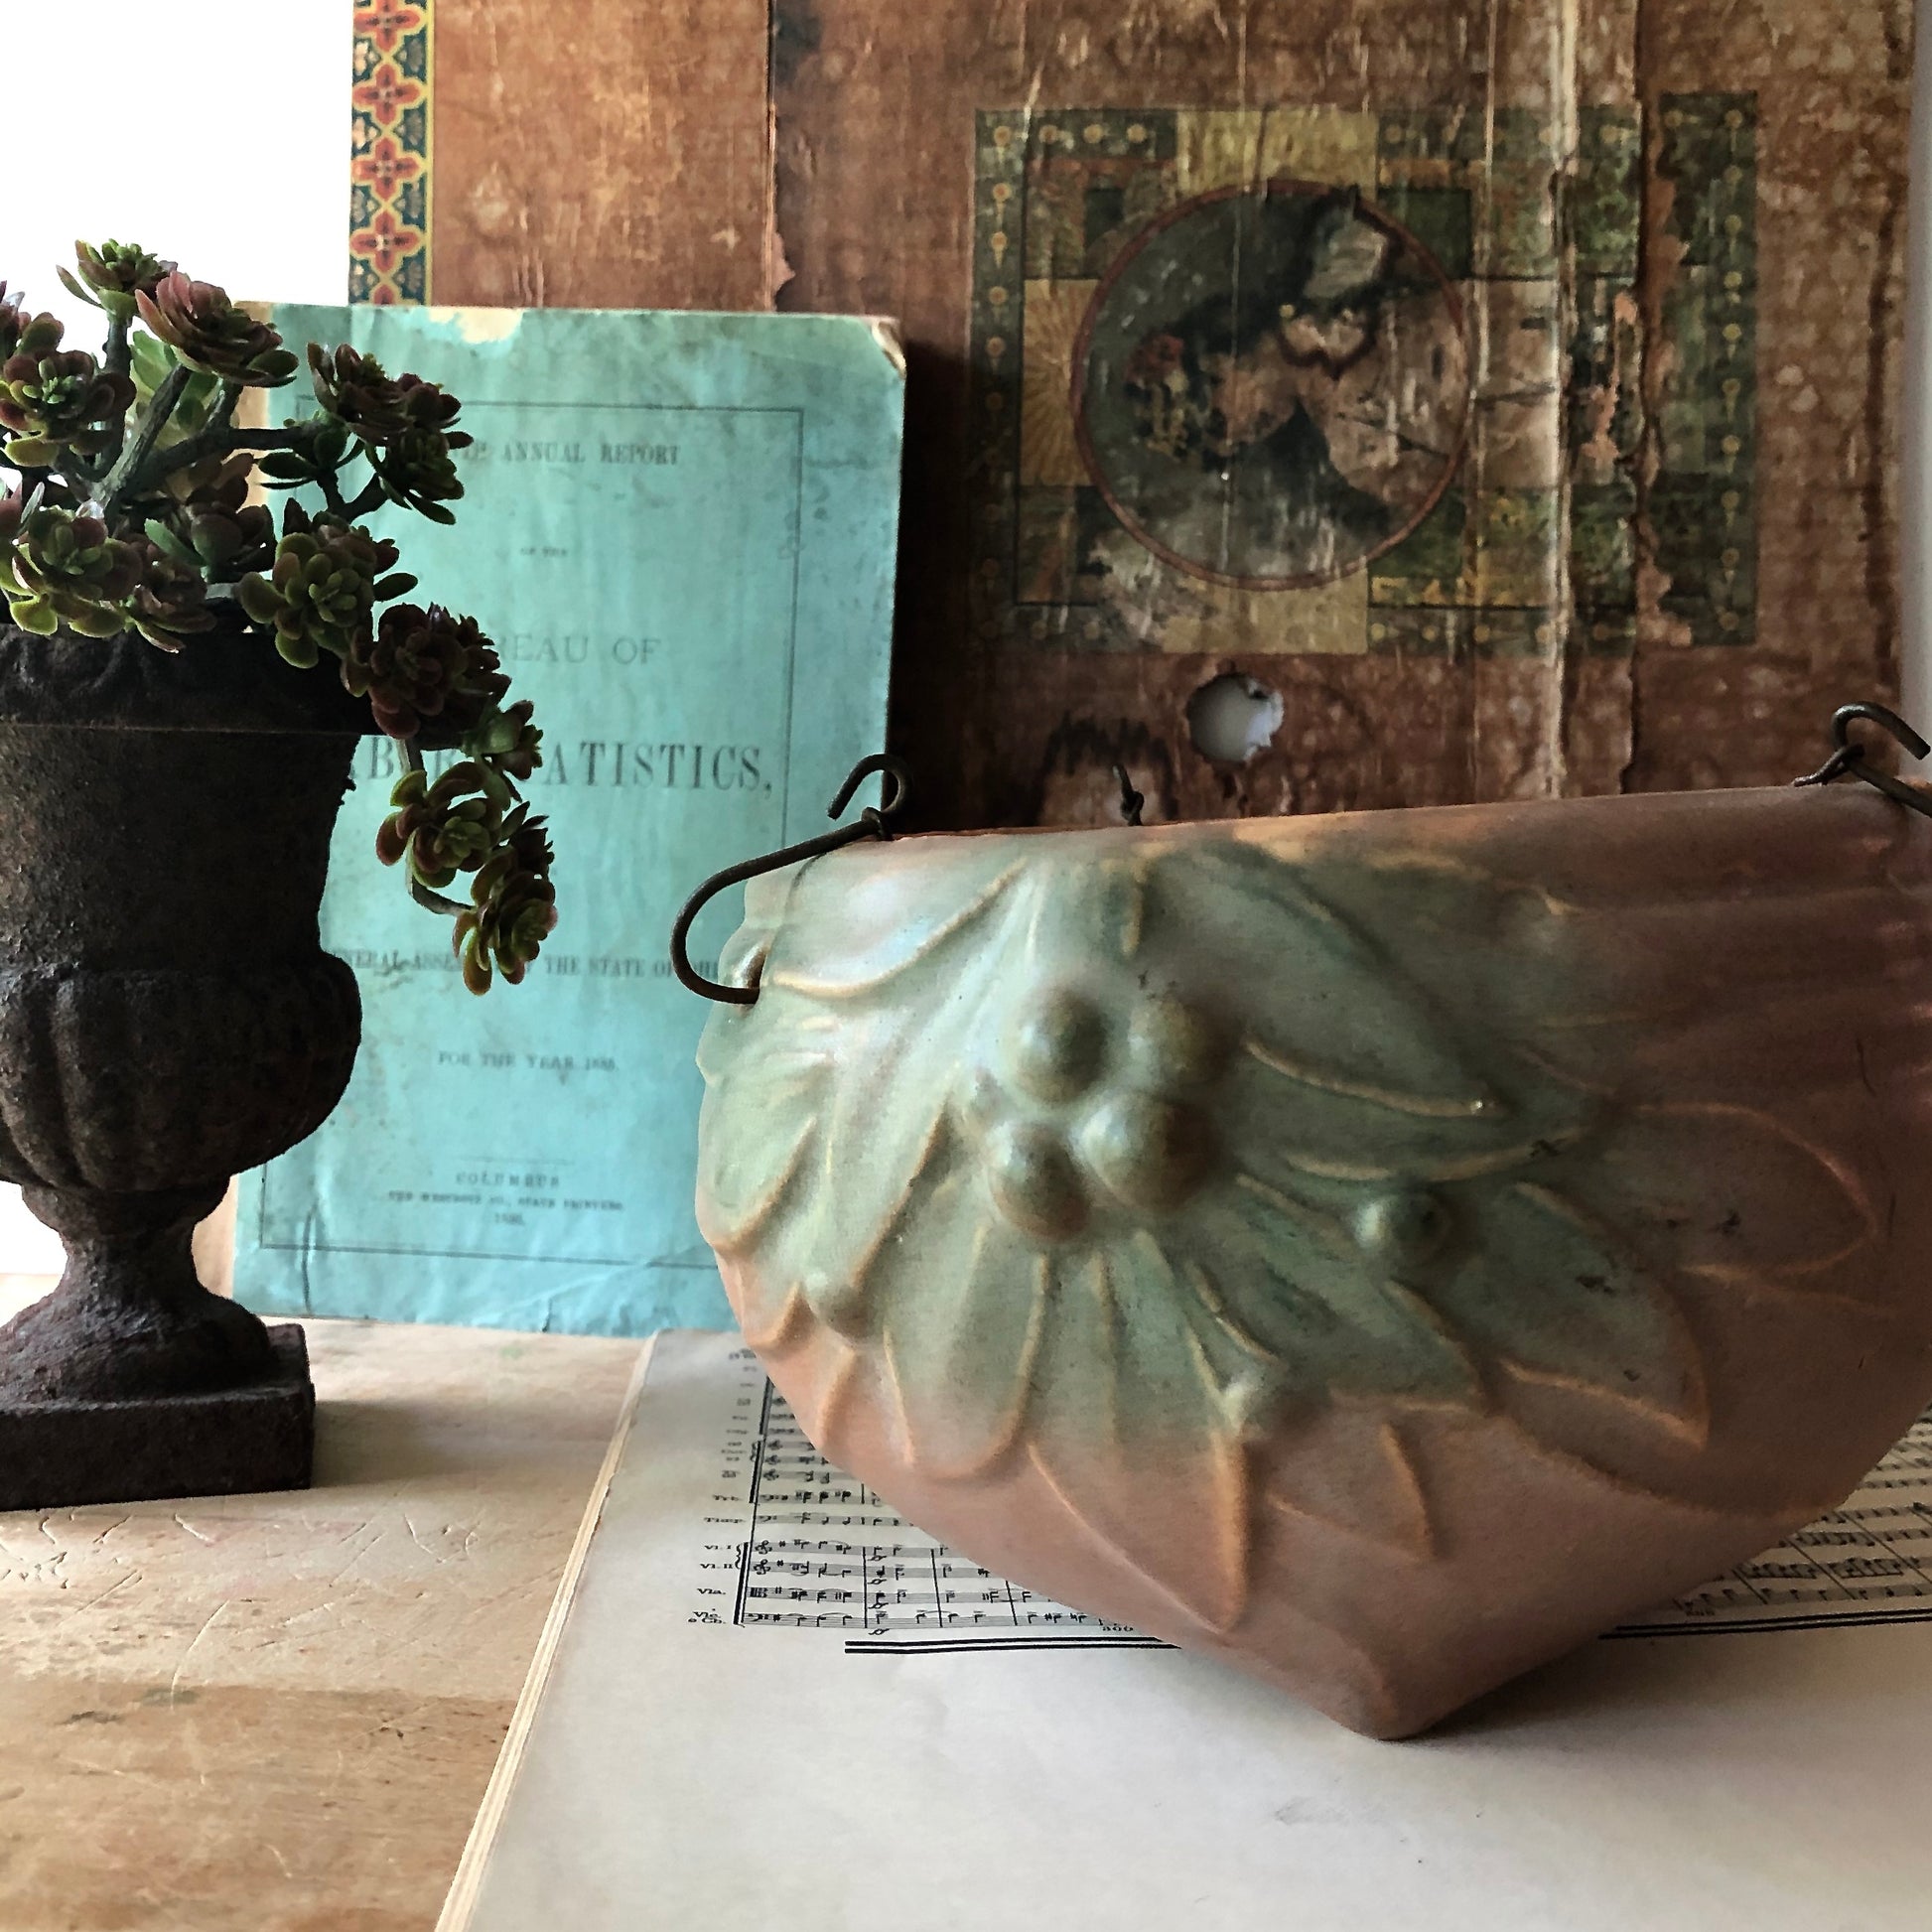 Early McCoy Pottery Hanging Planter (c.1920s)